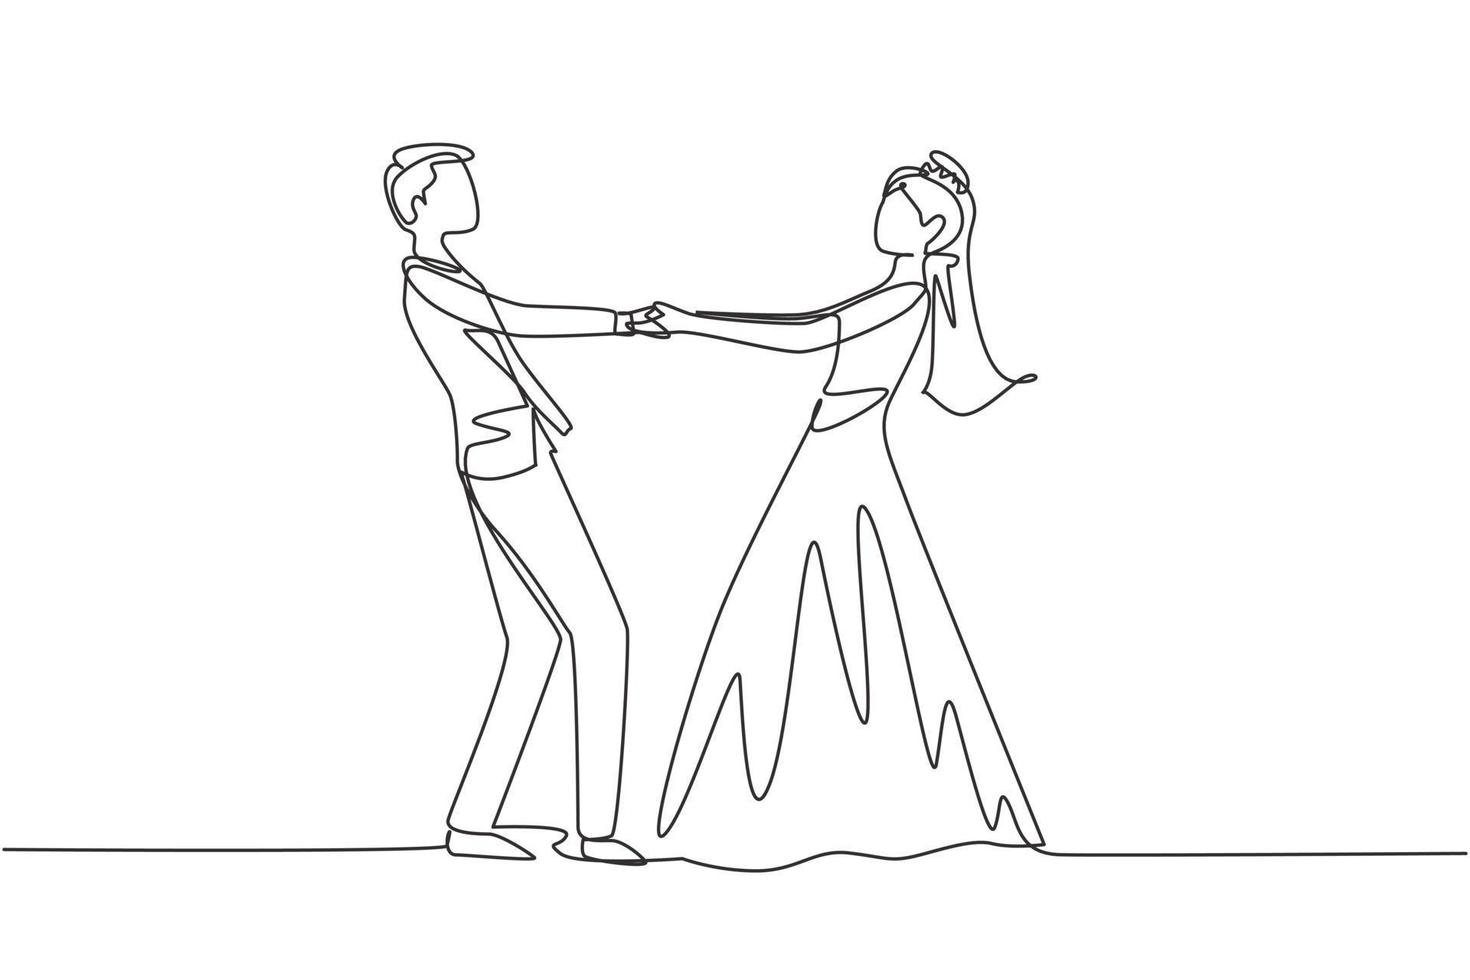 Single one line drawing happy cheerful boy and girl dancing on the floor at wedding party. Romantic young wedding couple holding hands and spinning around. Continuous line draw design graphic vector